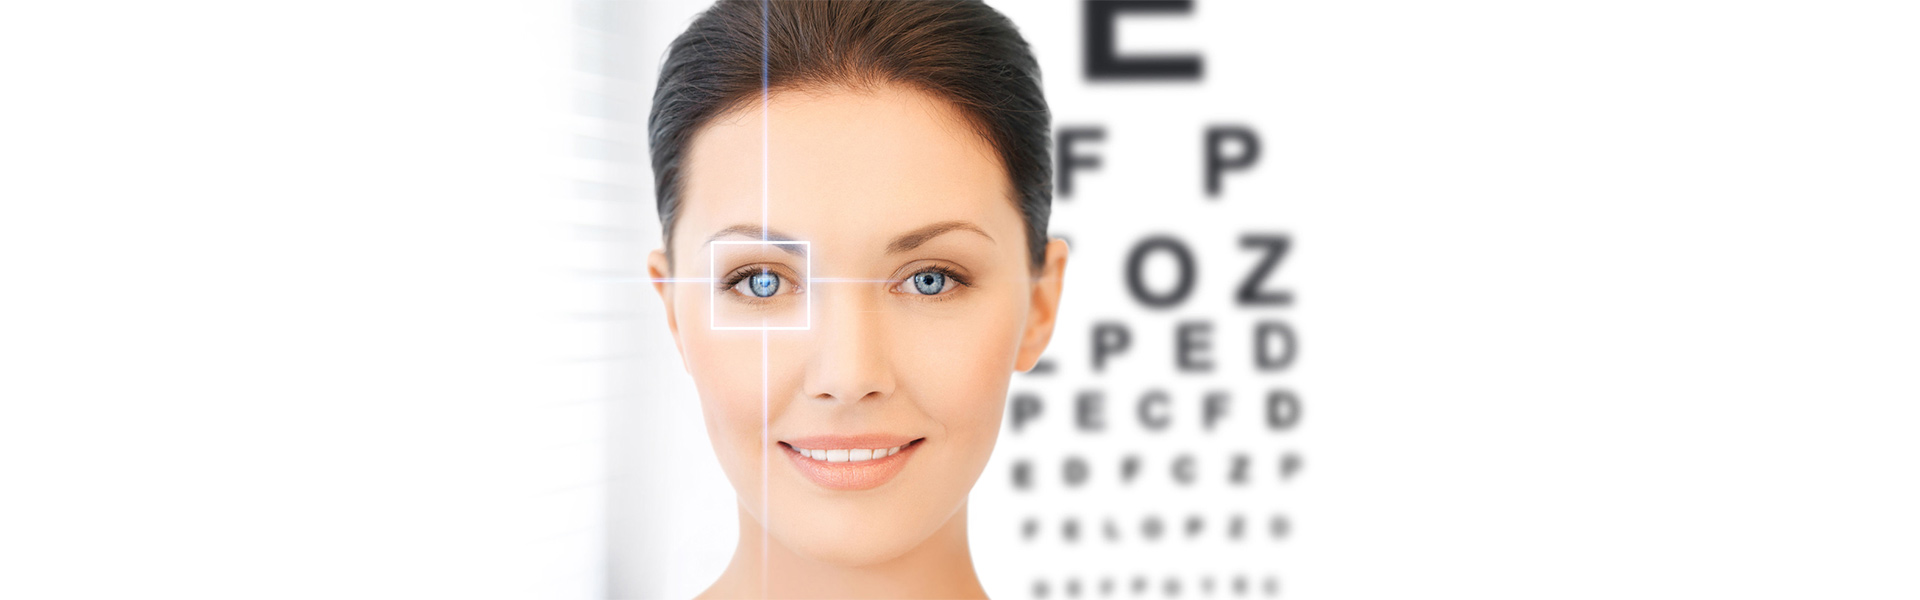 Get Improved Vision with Refractive Eye Surgery at Dr. Tang Eye Care